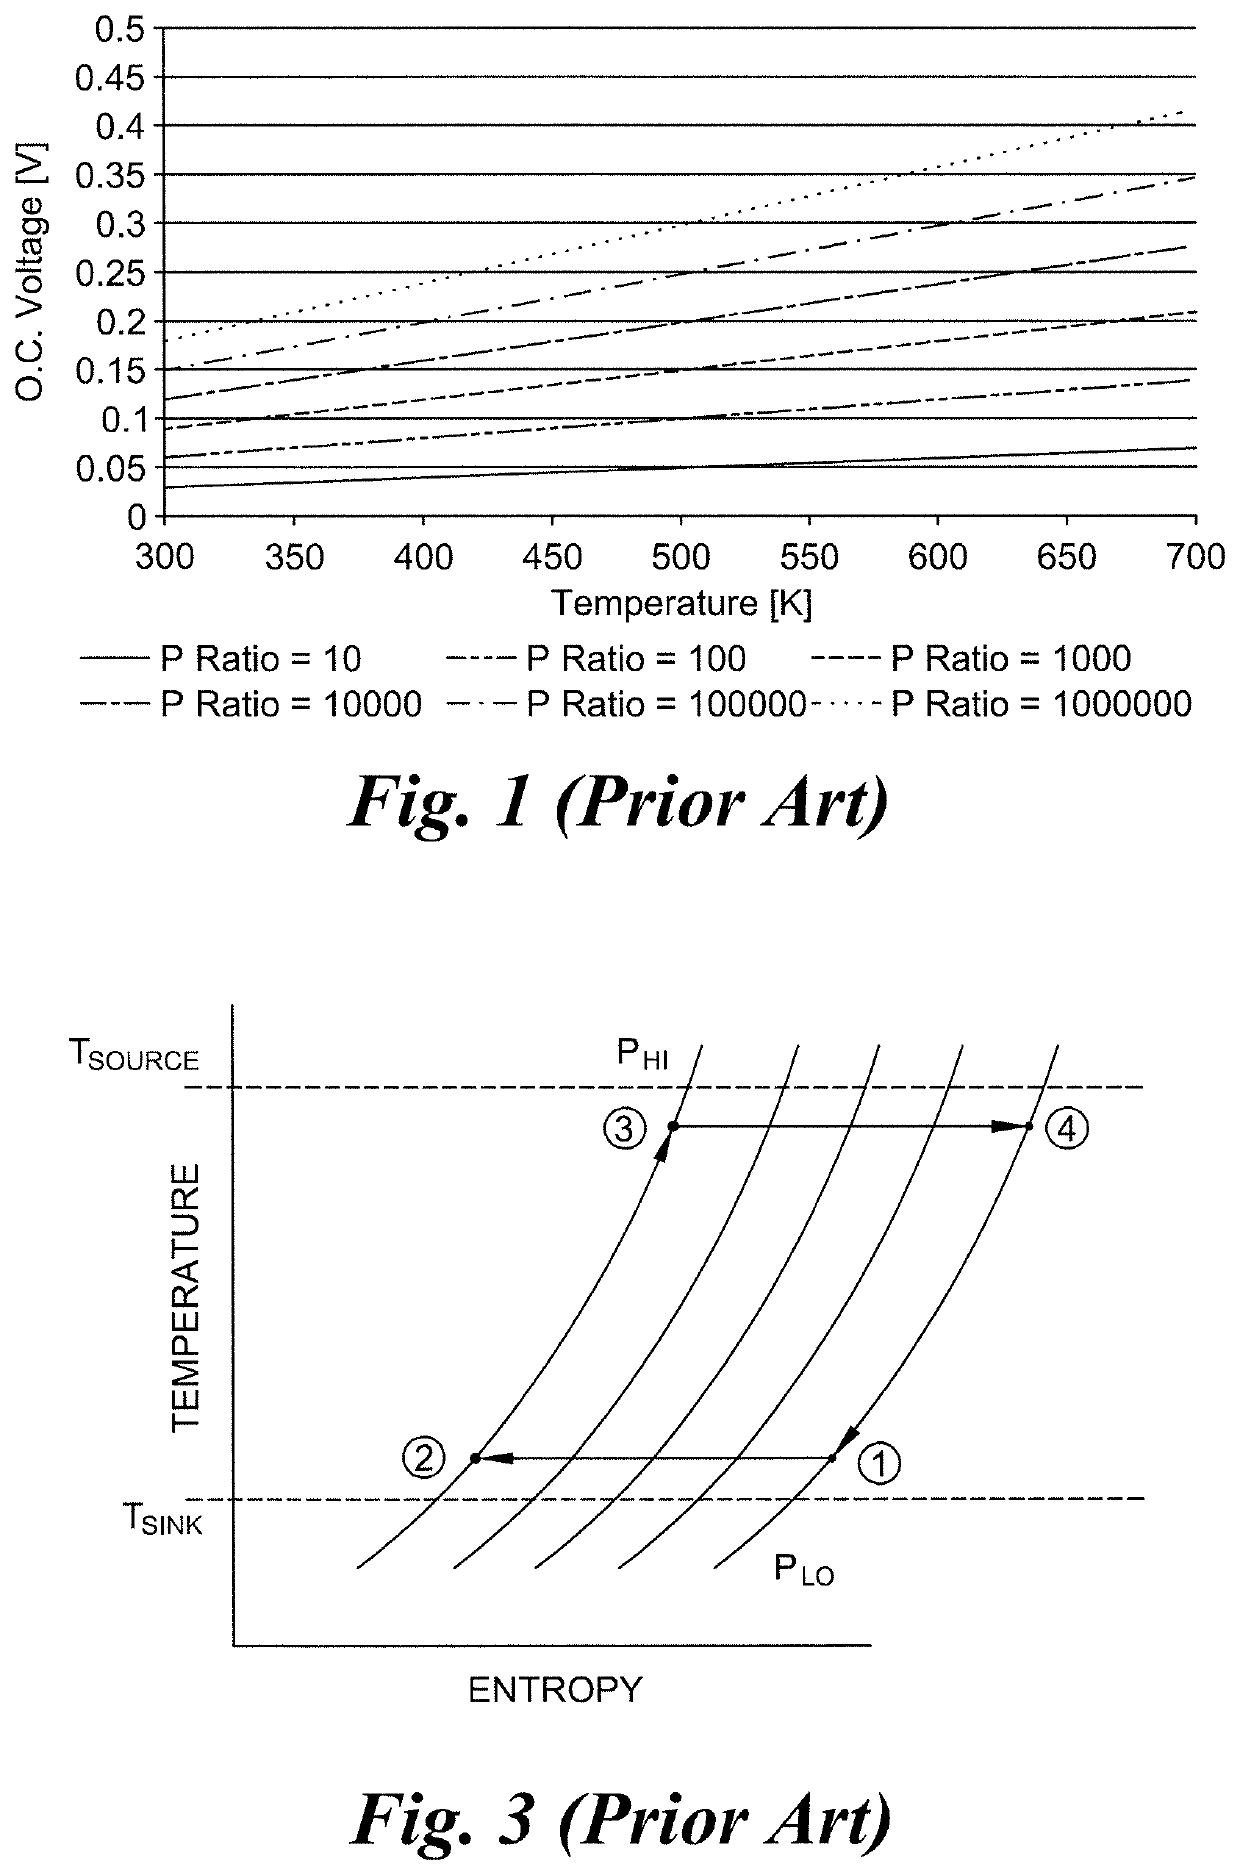 Thermo-electrochemical converter